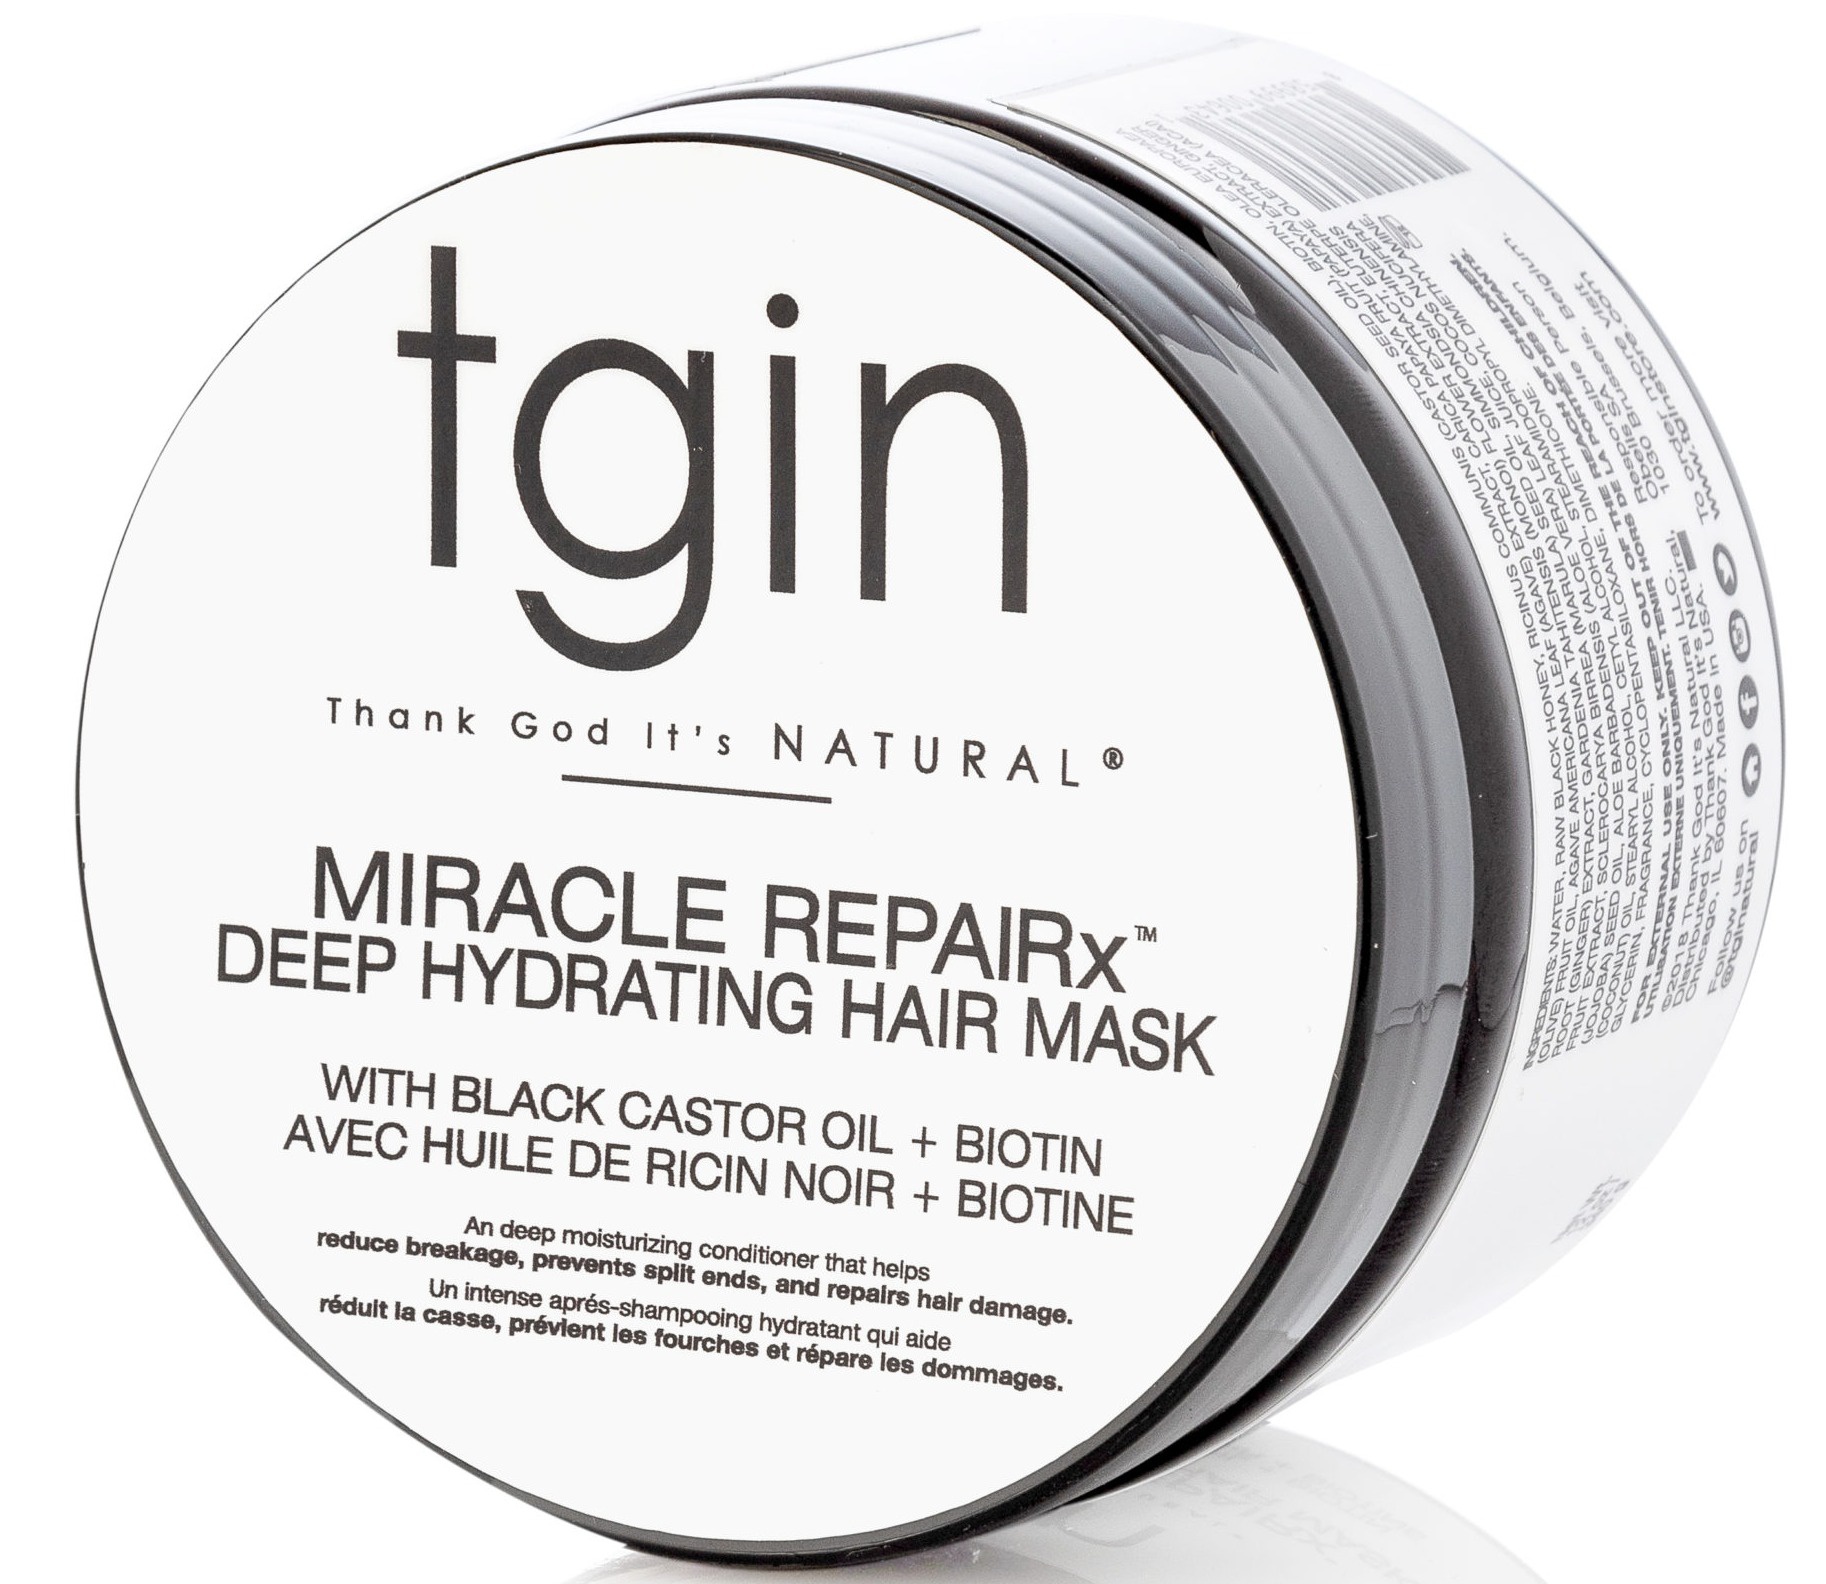 tgin Miracle Repairx Deep Hydrating Hair Mask With Black Castor Oil And Biotin